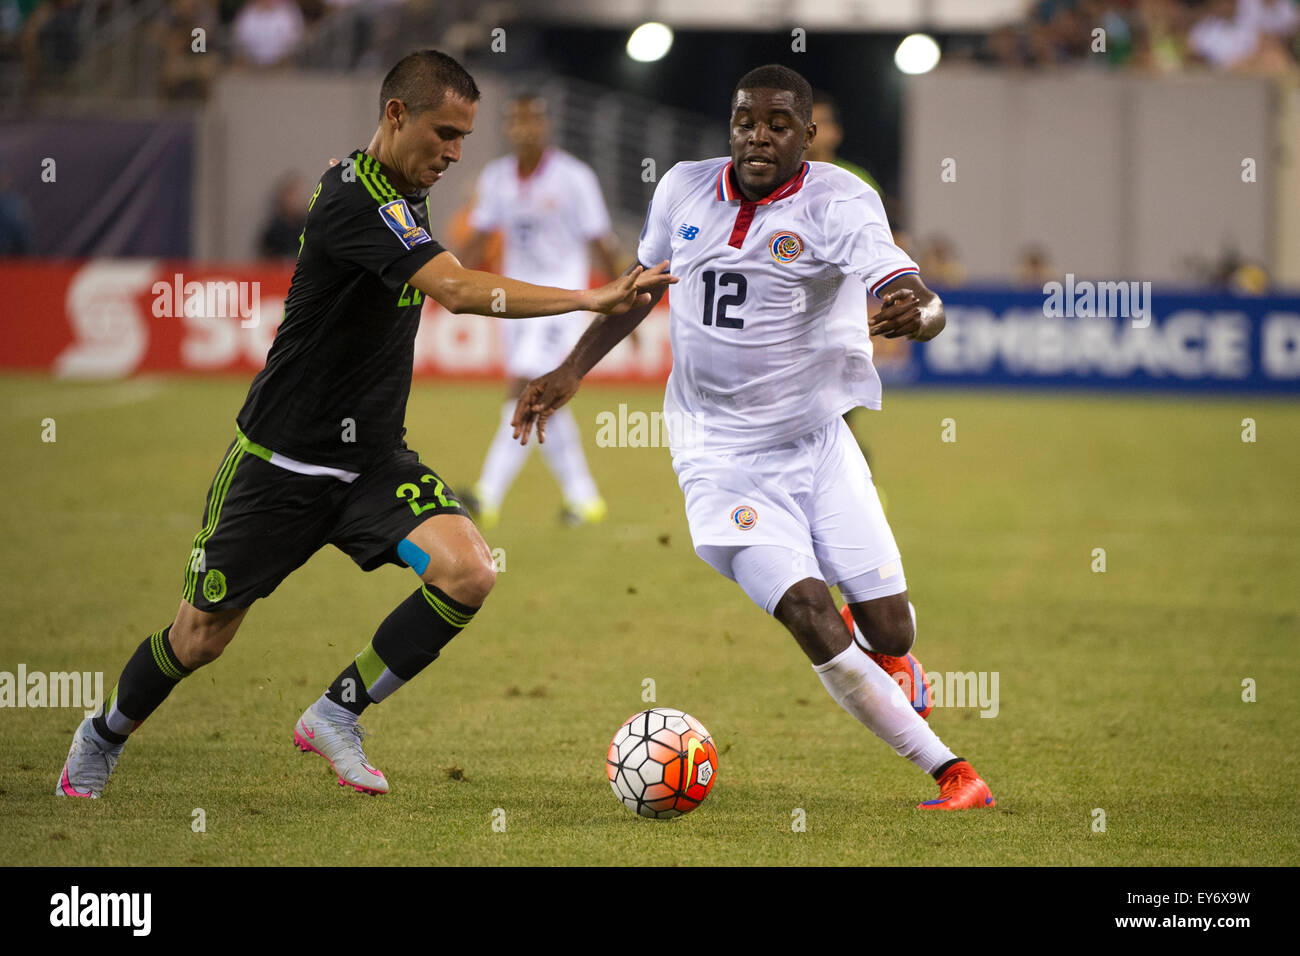 Extra Time. 19th July, 2015. Costa Rica forward Joel Campbell (12) is in action along with Mexico defender Paul Aguilar (22) during the quarter-finals of The CONCACAF Gold Cup match between Mexico and Costa Rica at Met Life Stadium, East Rutherford, NJ. Mexico defeated Costa Rica 1-0 in the final minute of extra time. Mandatory Credit: Kostas Lymperopoulos/CSM/Alamy Live News Stock Photo